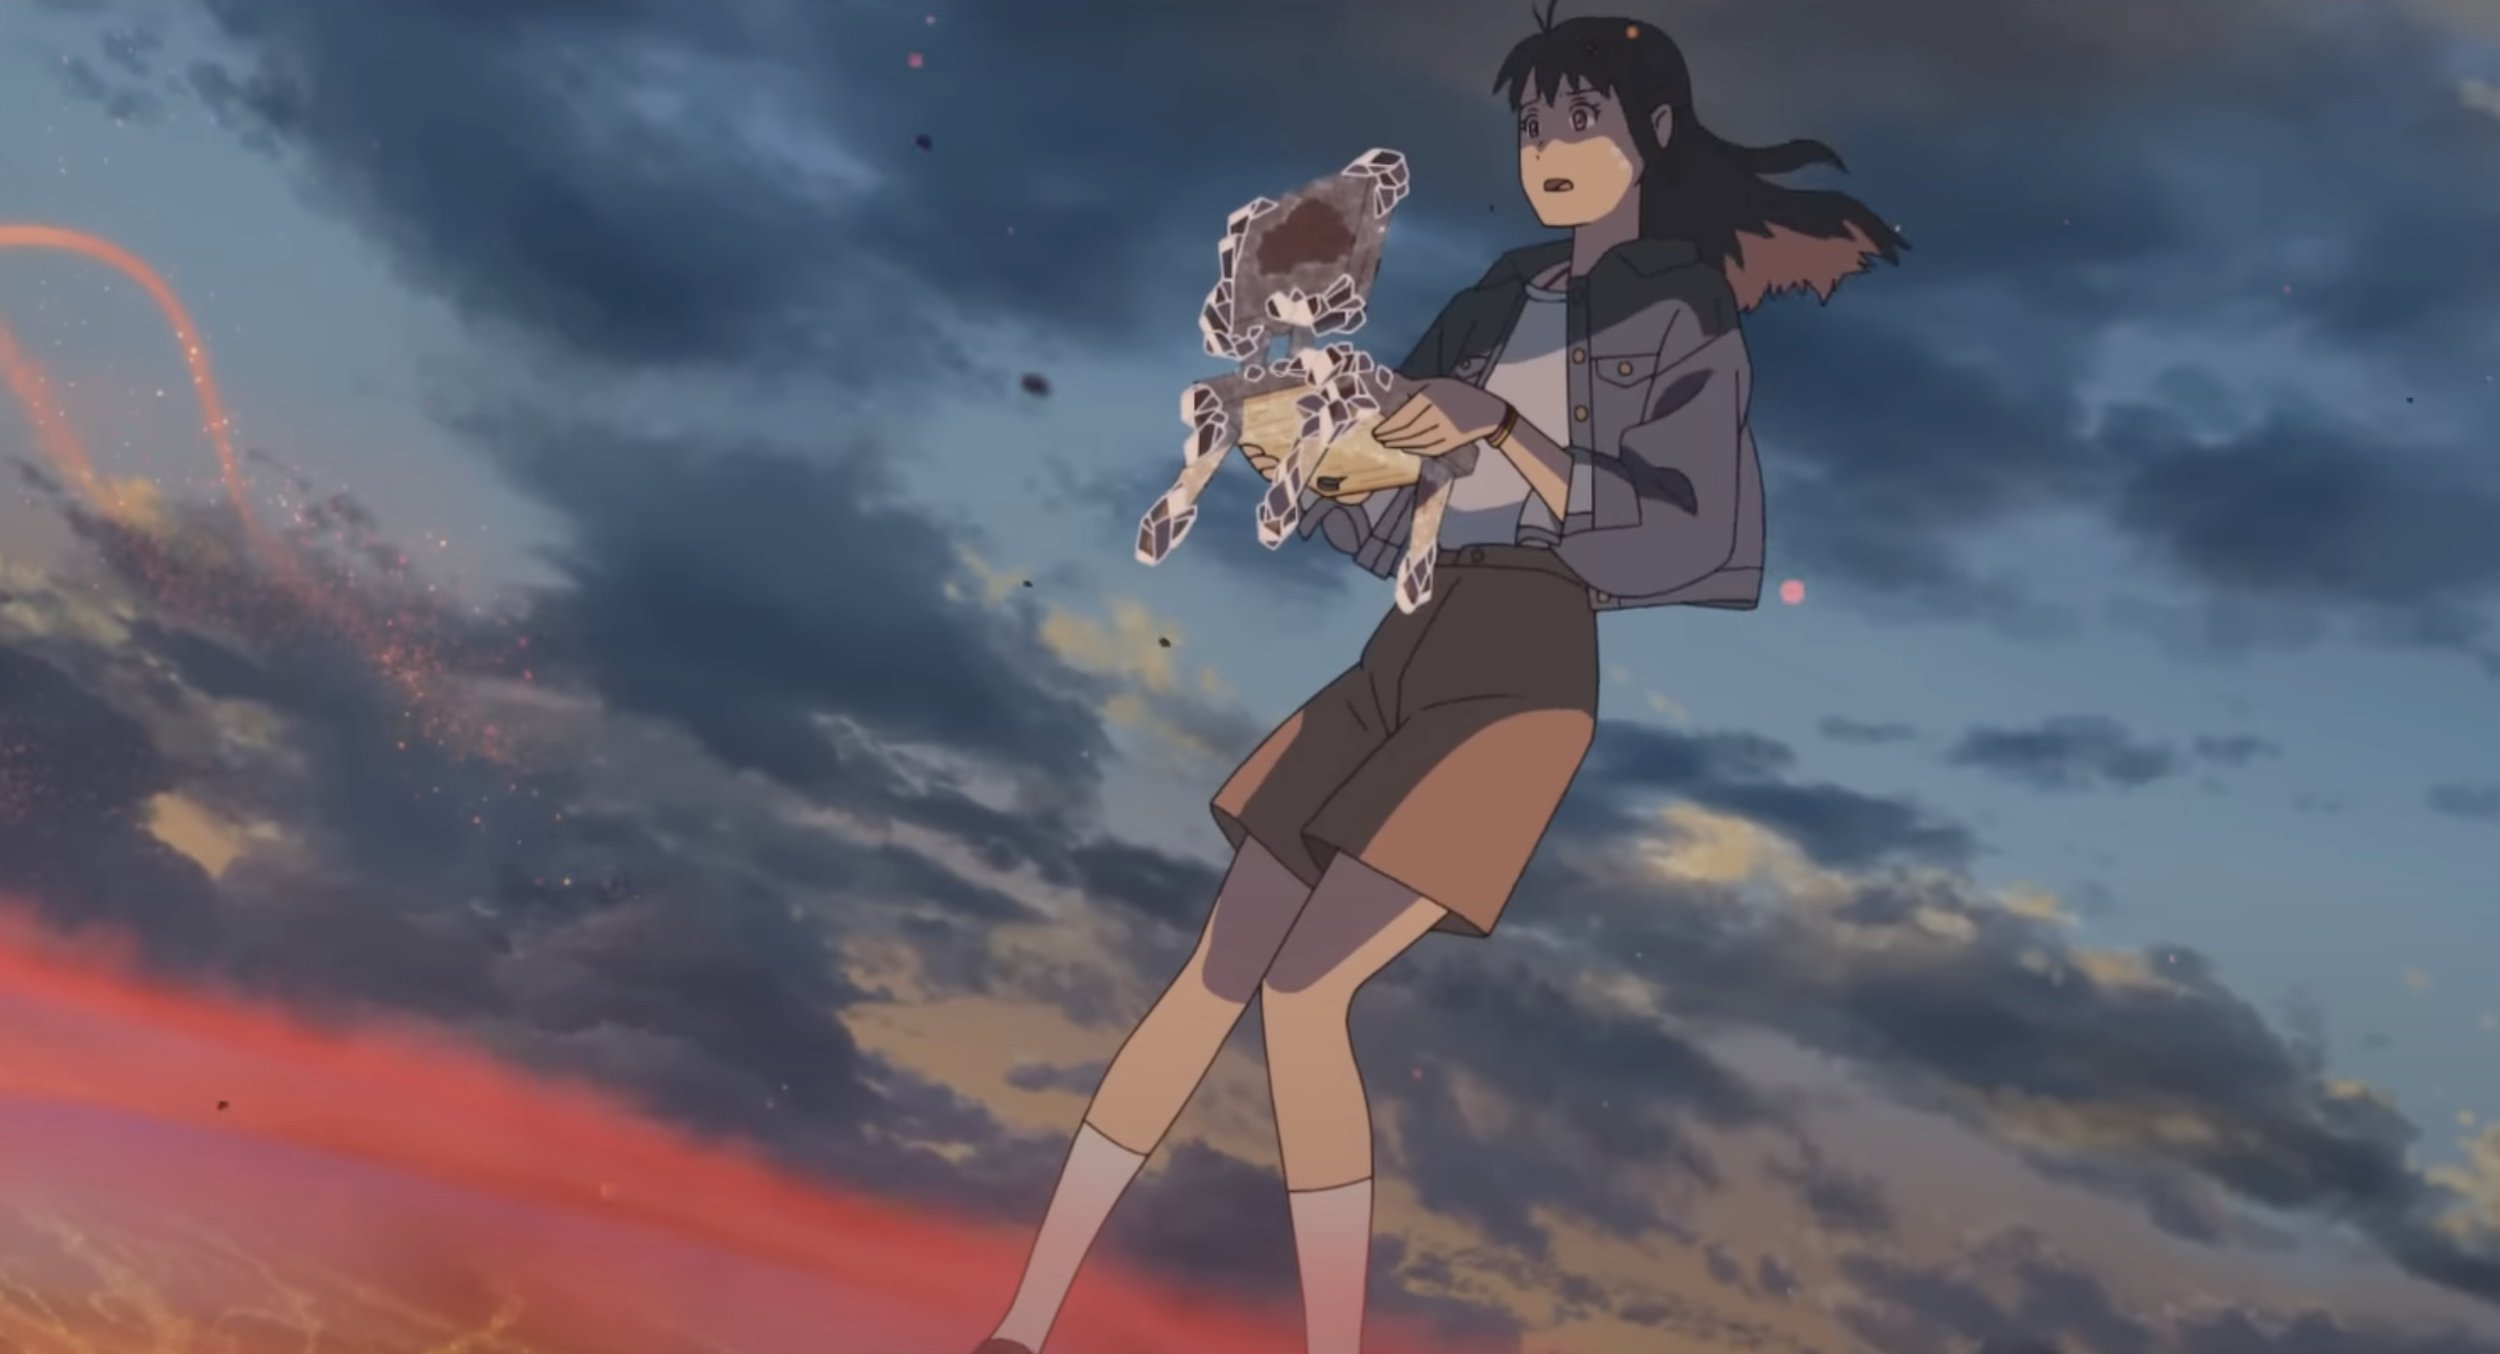 New Trailer for the Upcoming Anime Film SUZUME From the Director